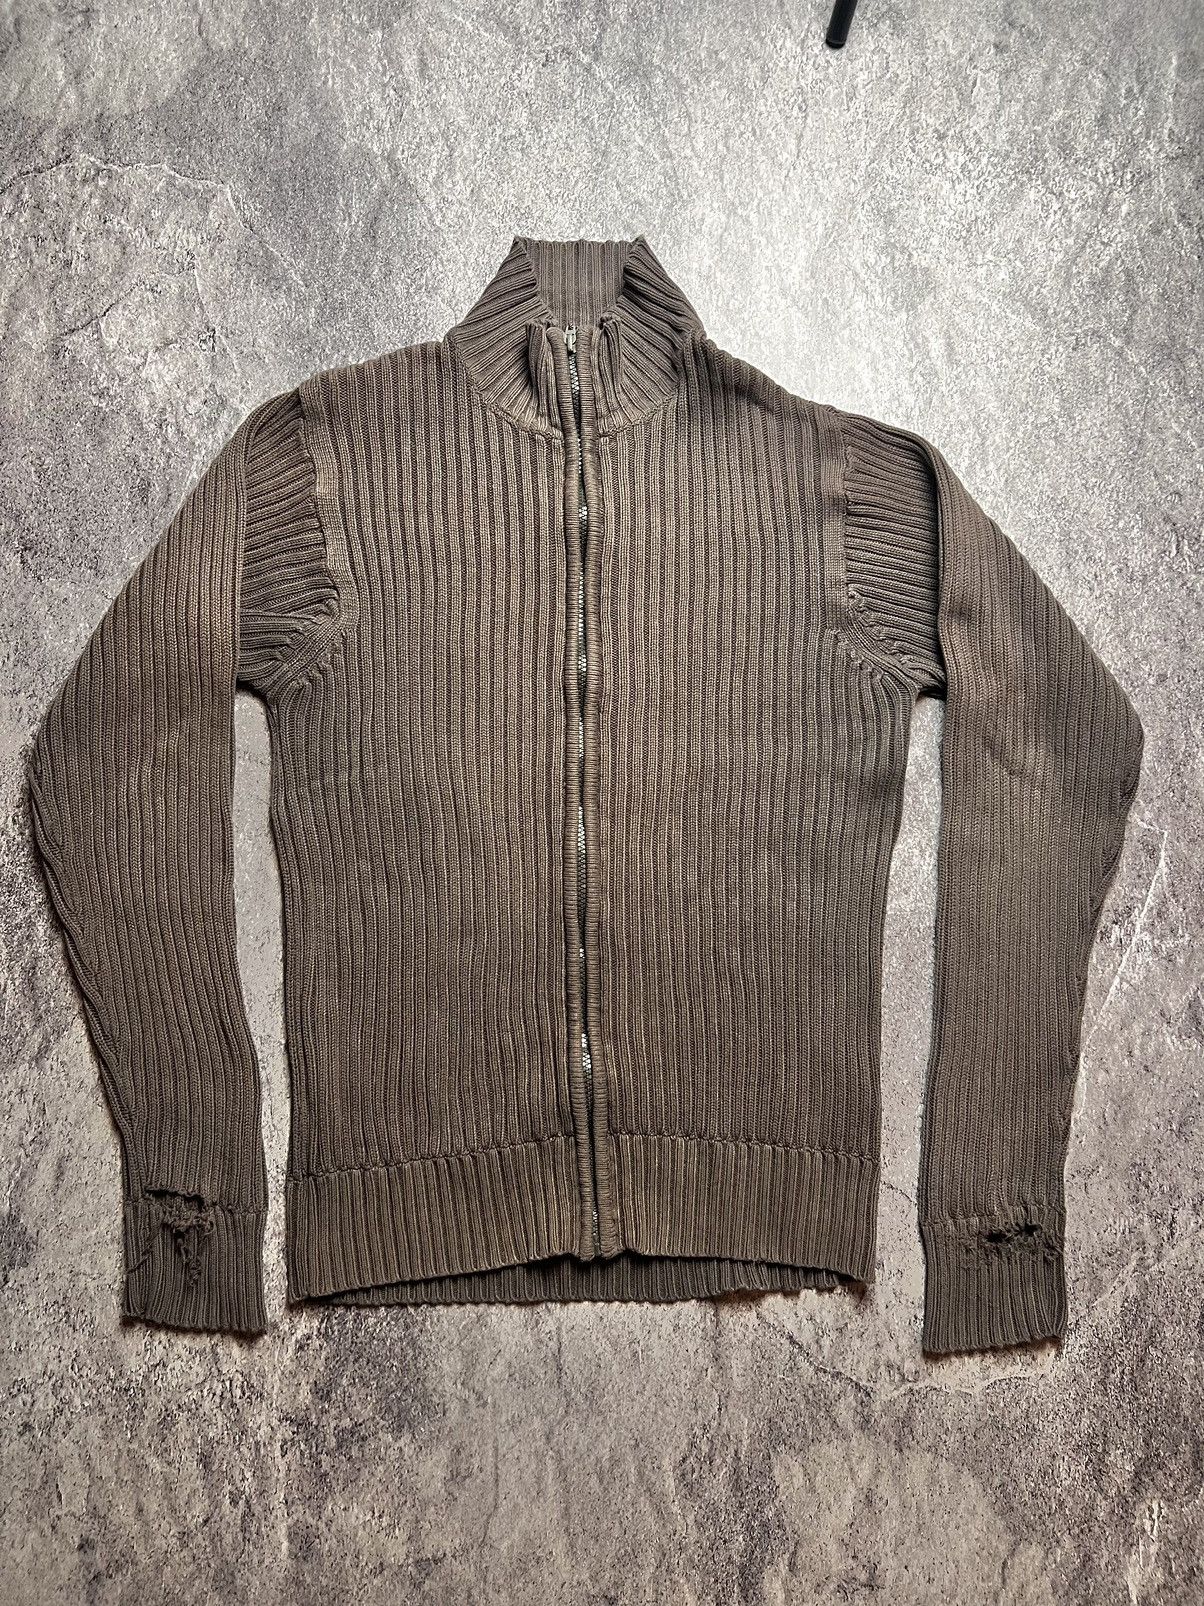 Pre-owned Archival Clothing X Vintage Y2k Archival Distressed Japan Style Knit Sweater In Light Brown